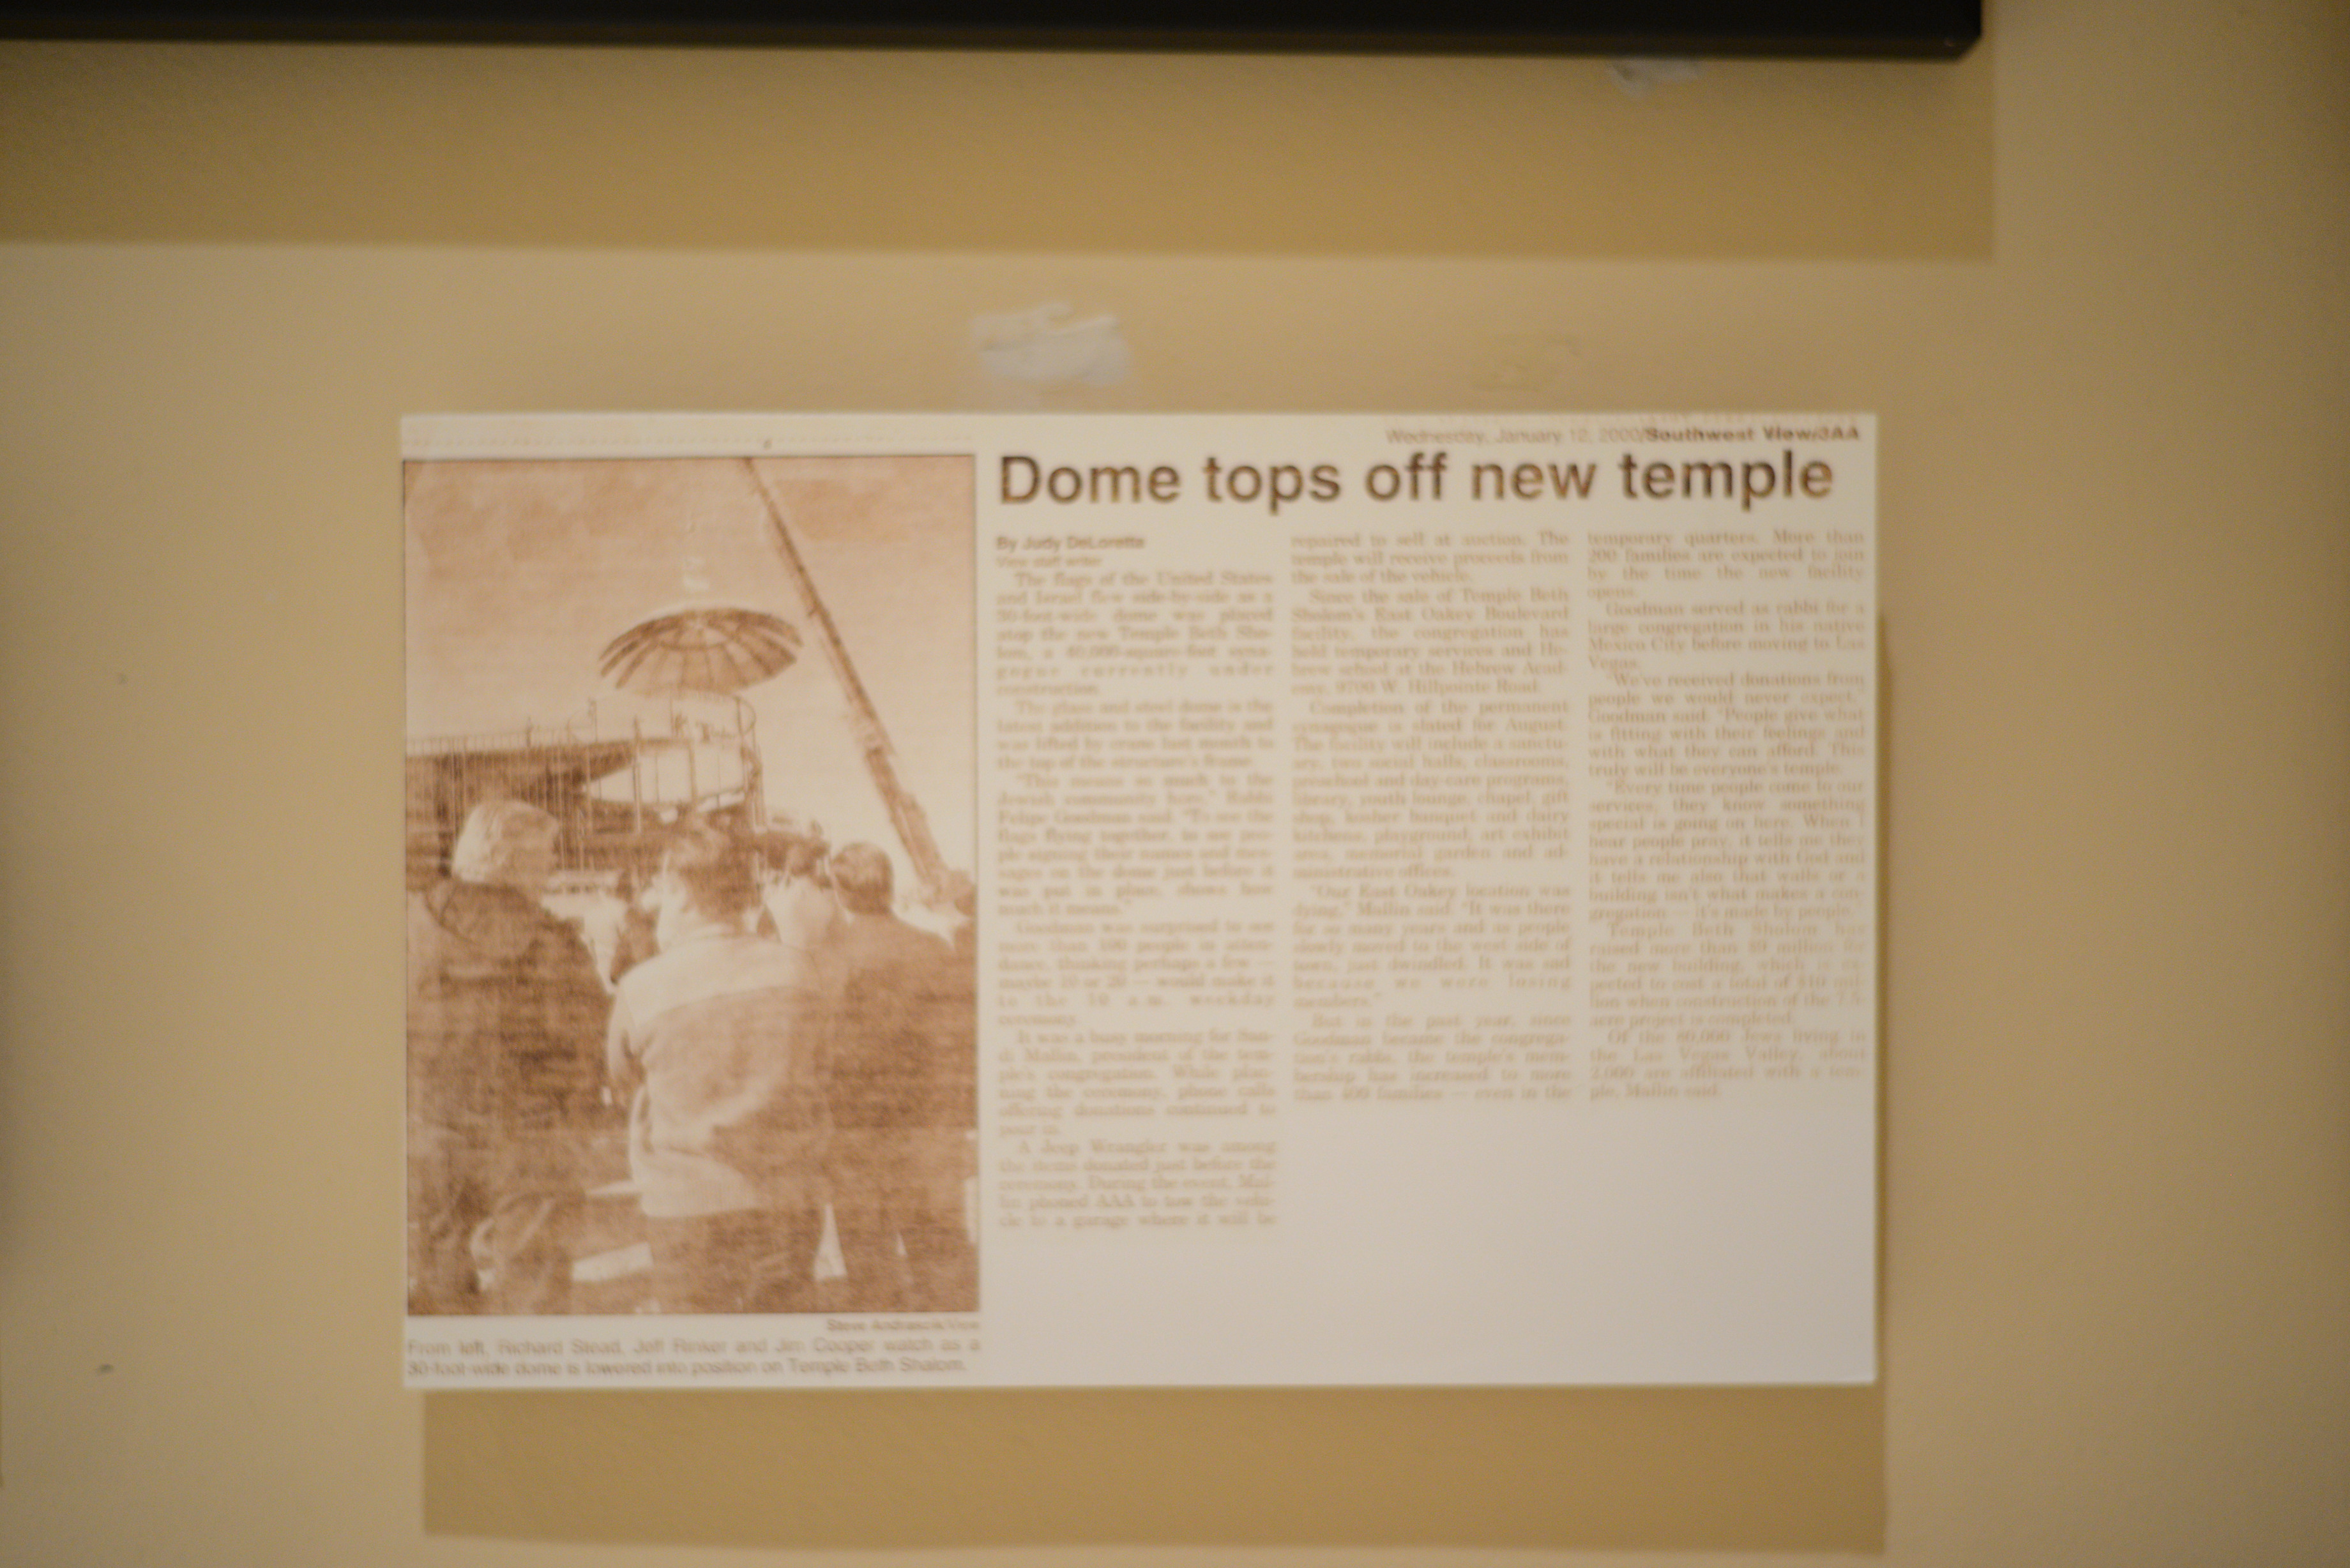 Photograph of newspaper clipping, Dome tops off new temple, publication unknown, January 12, 2000